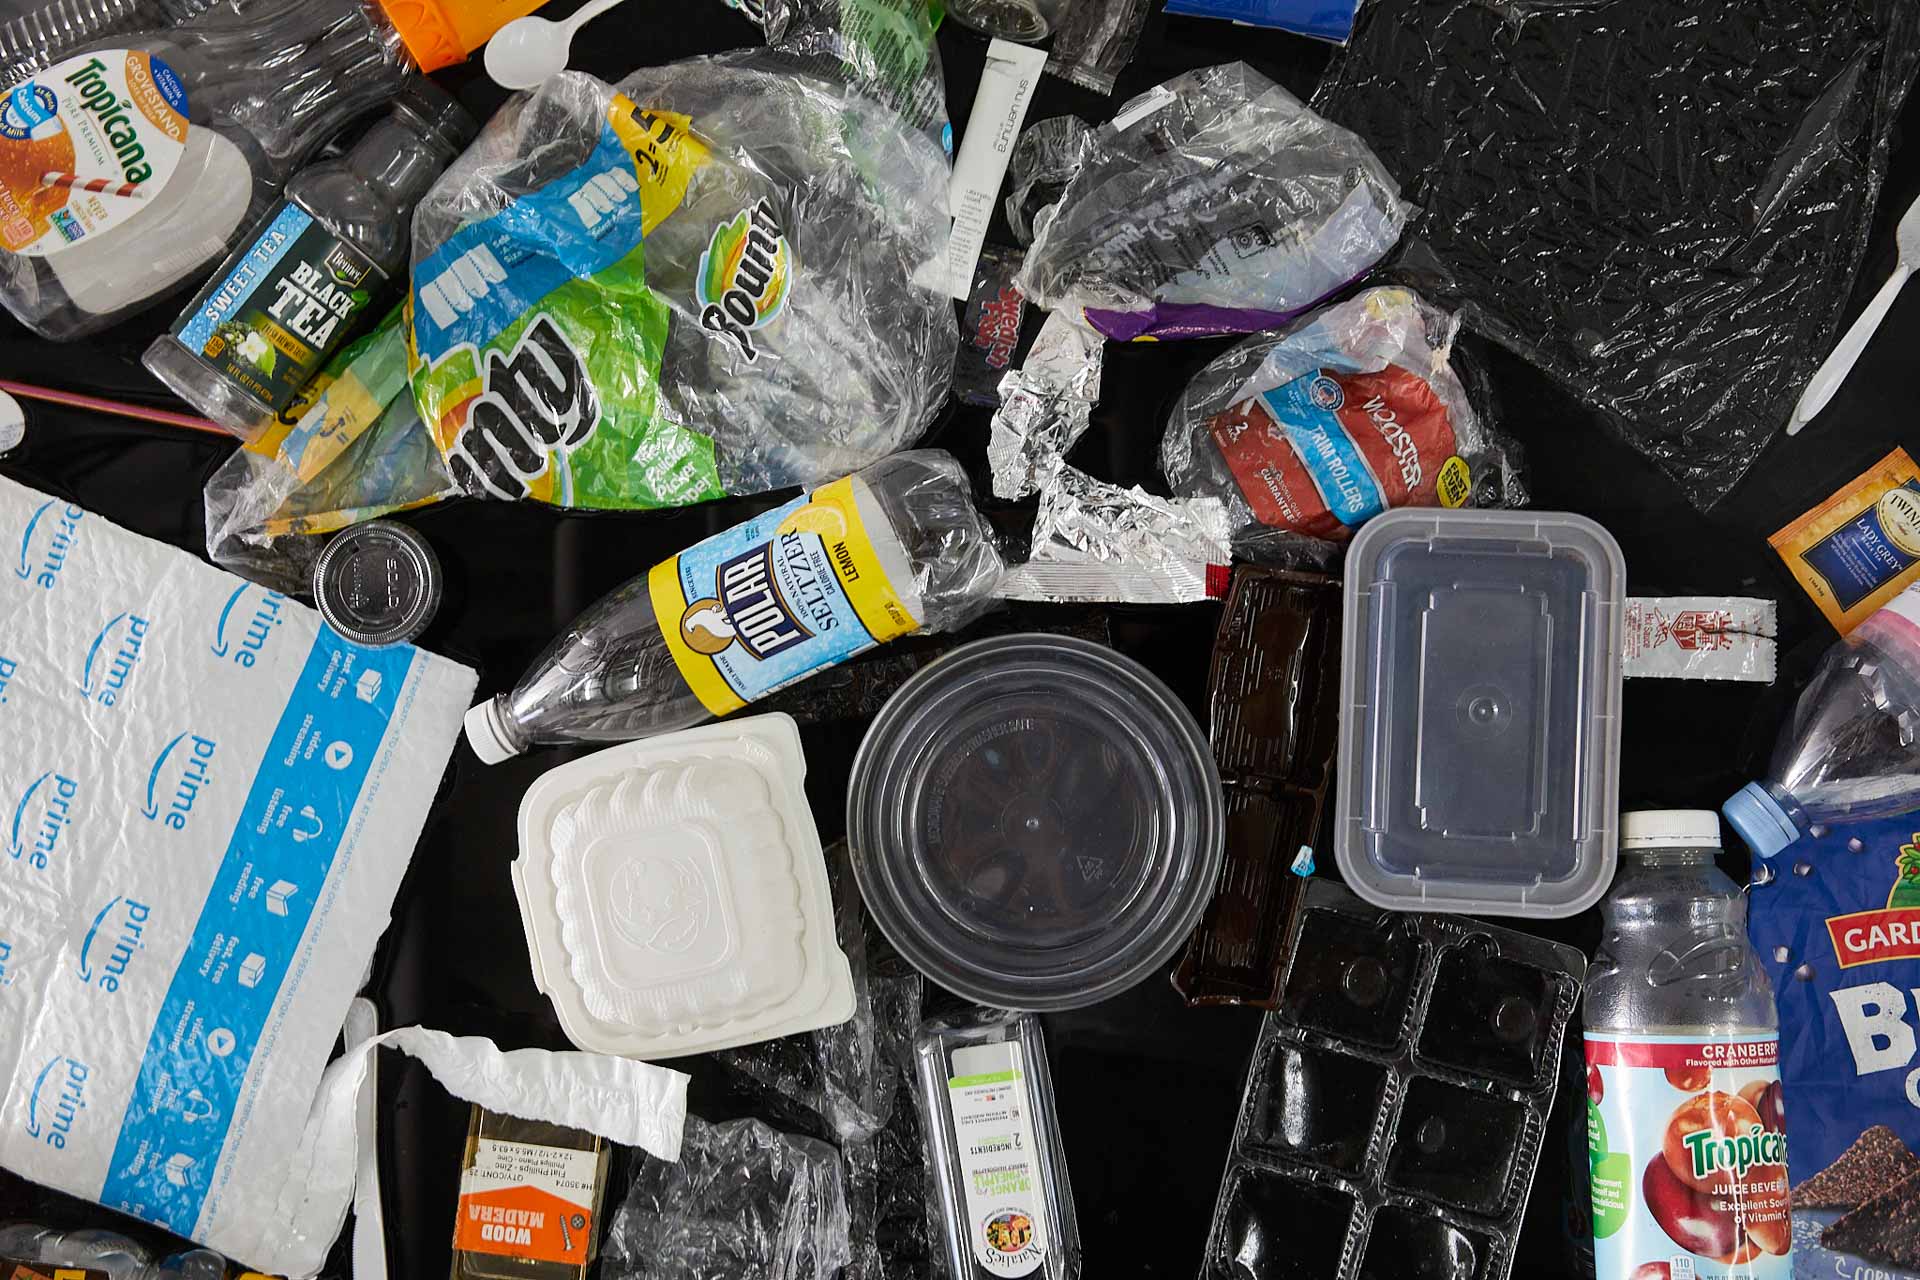 Top down close-up photo of about 50 pieces of trash floating in a black pool. Most prominently featured is a yellow Polar Seltzer bottle, Bounty plastic wrapping, and an Amazon Prime shipping package.